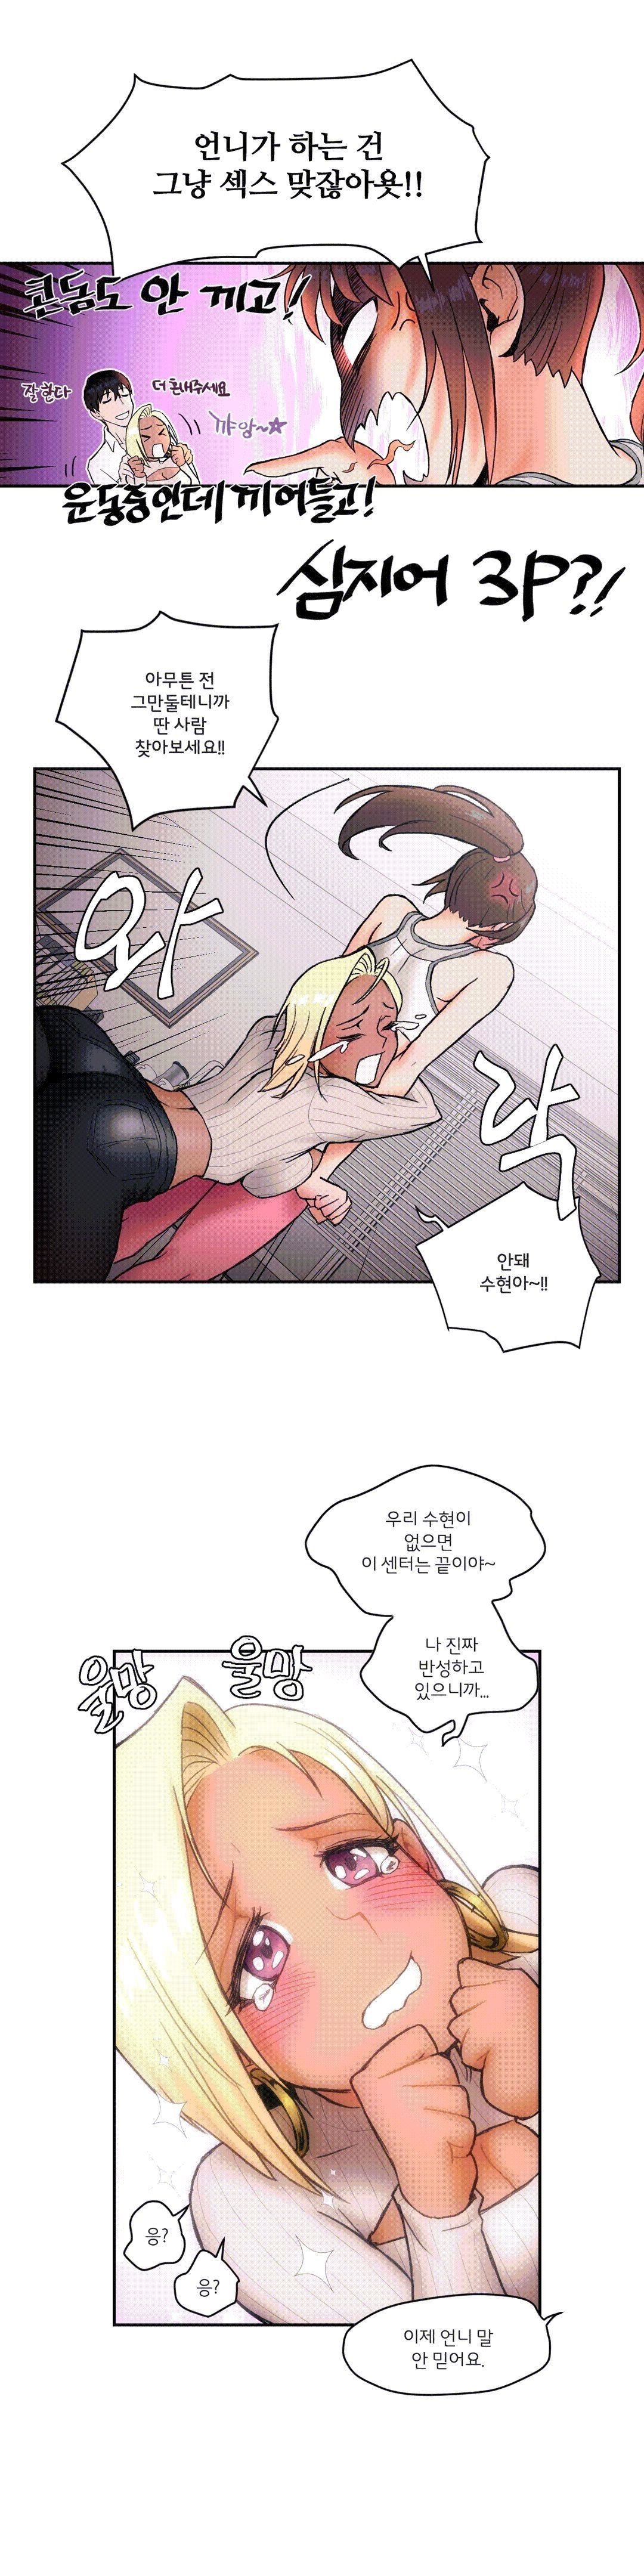 Sexercise Raw - Chapter 6 Page 3